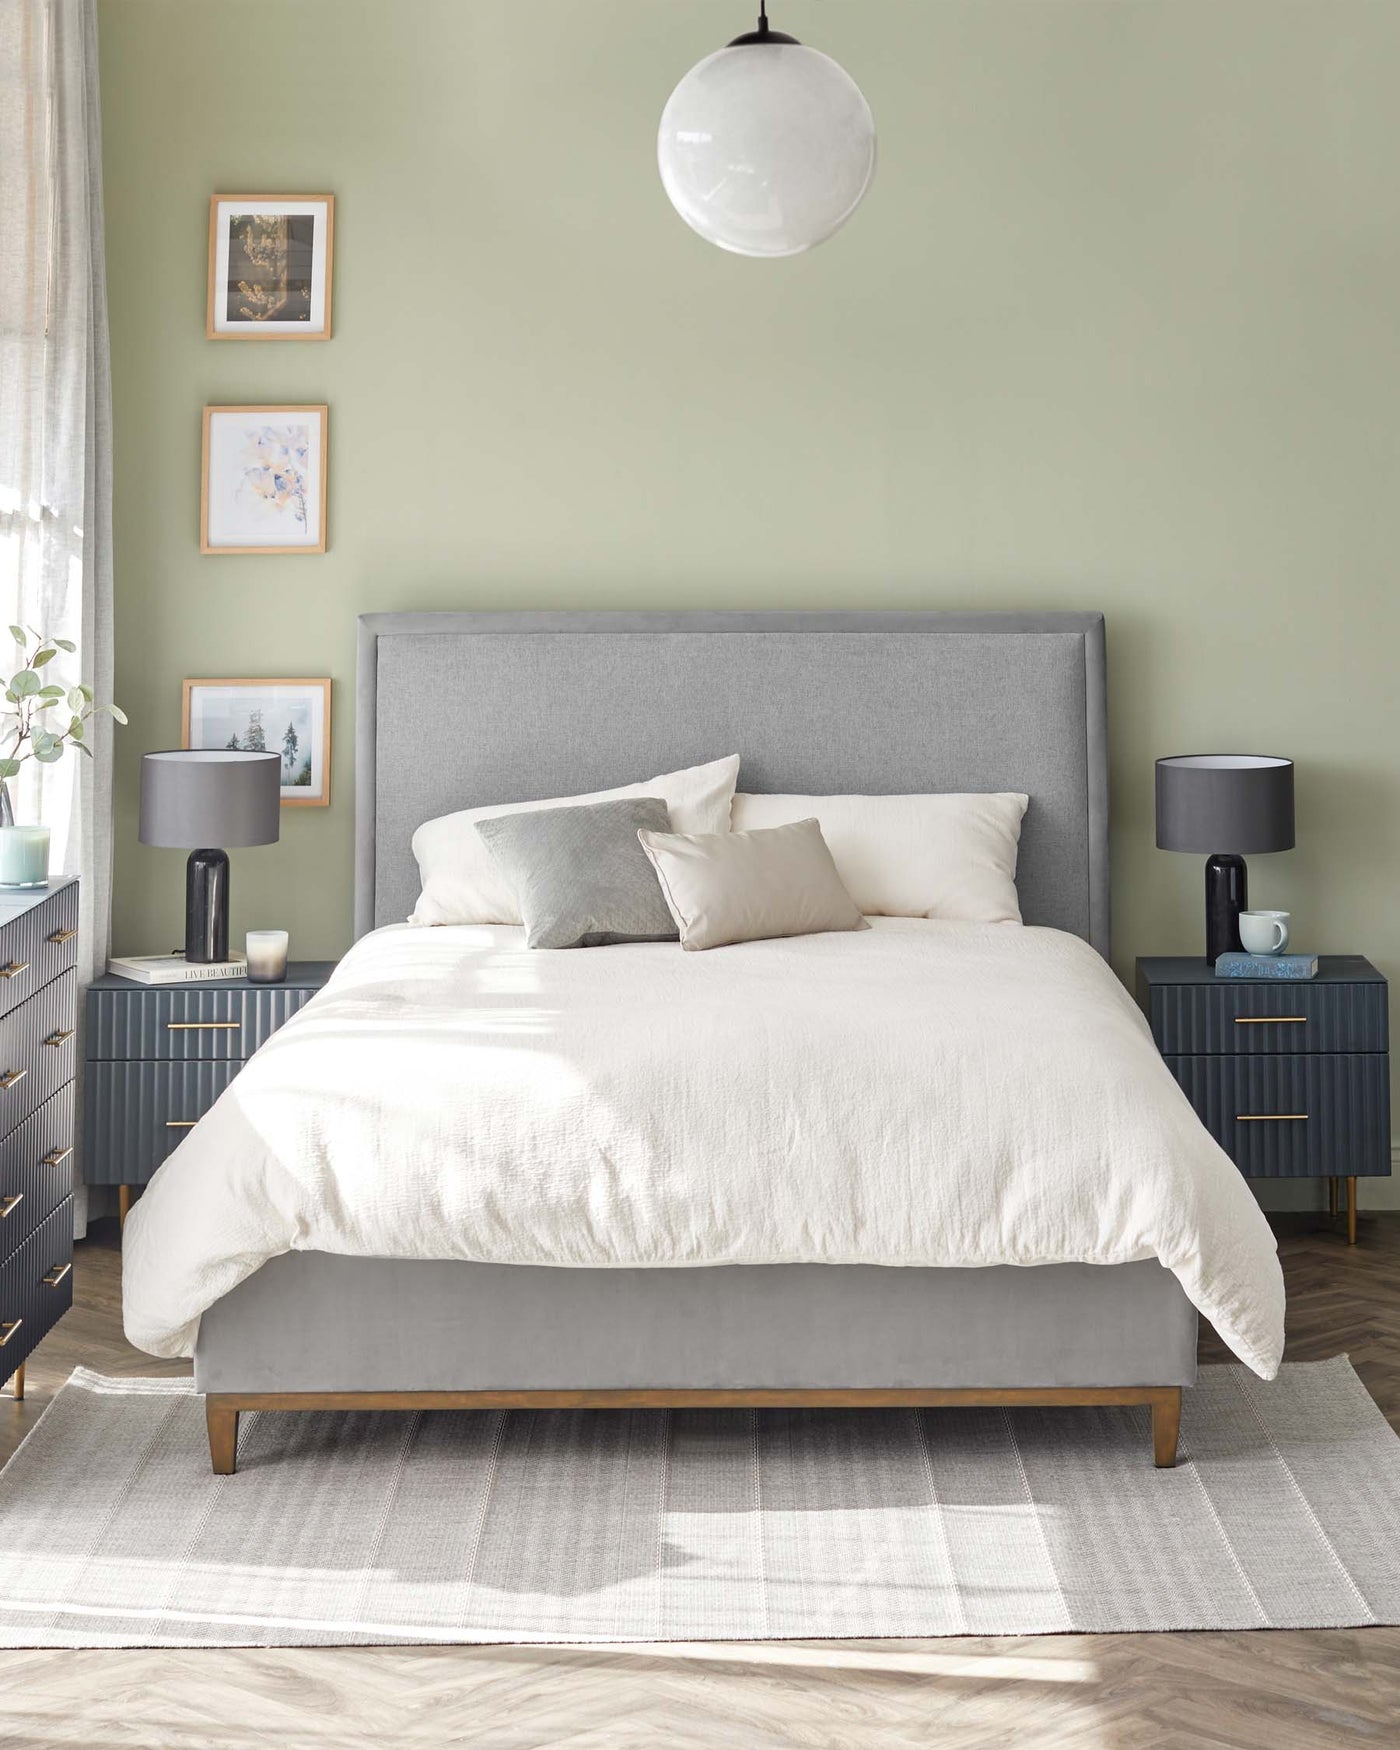 A contemporary bedroom showcasing a grey upholstered platform bed with a tall headboard, flanked by two dark blue-grey wooden nightstands with brass handles. A white globe pendant light hangs above.